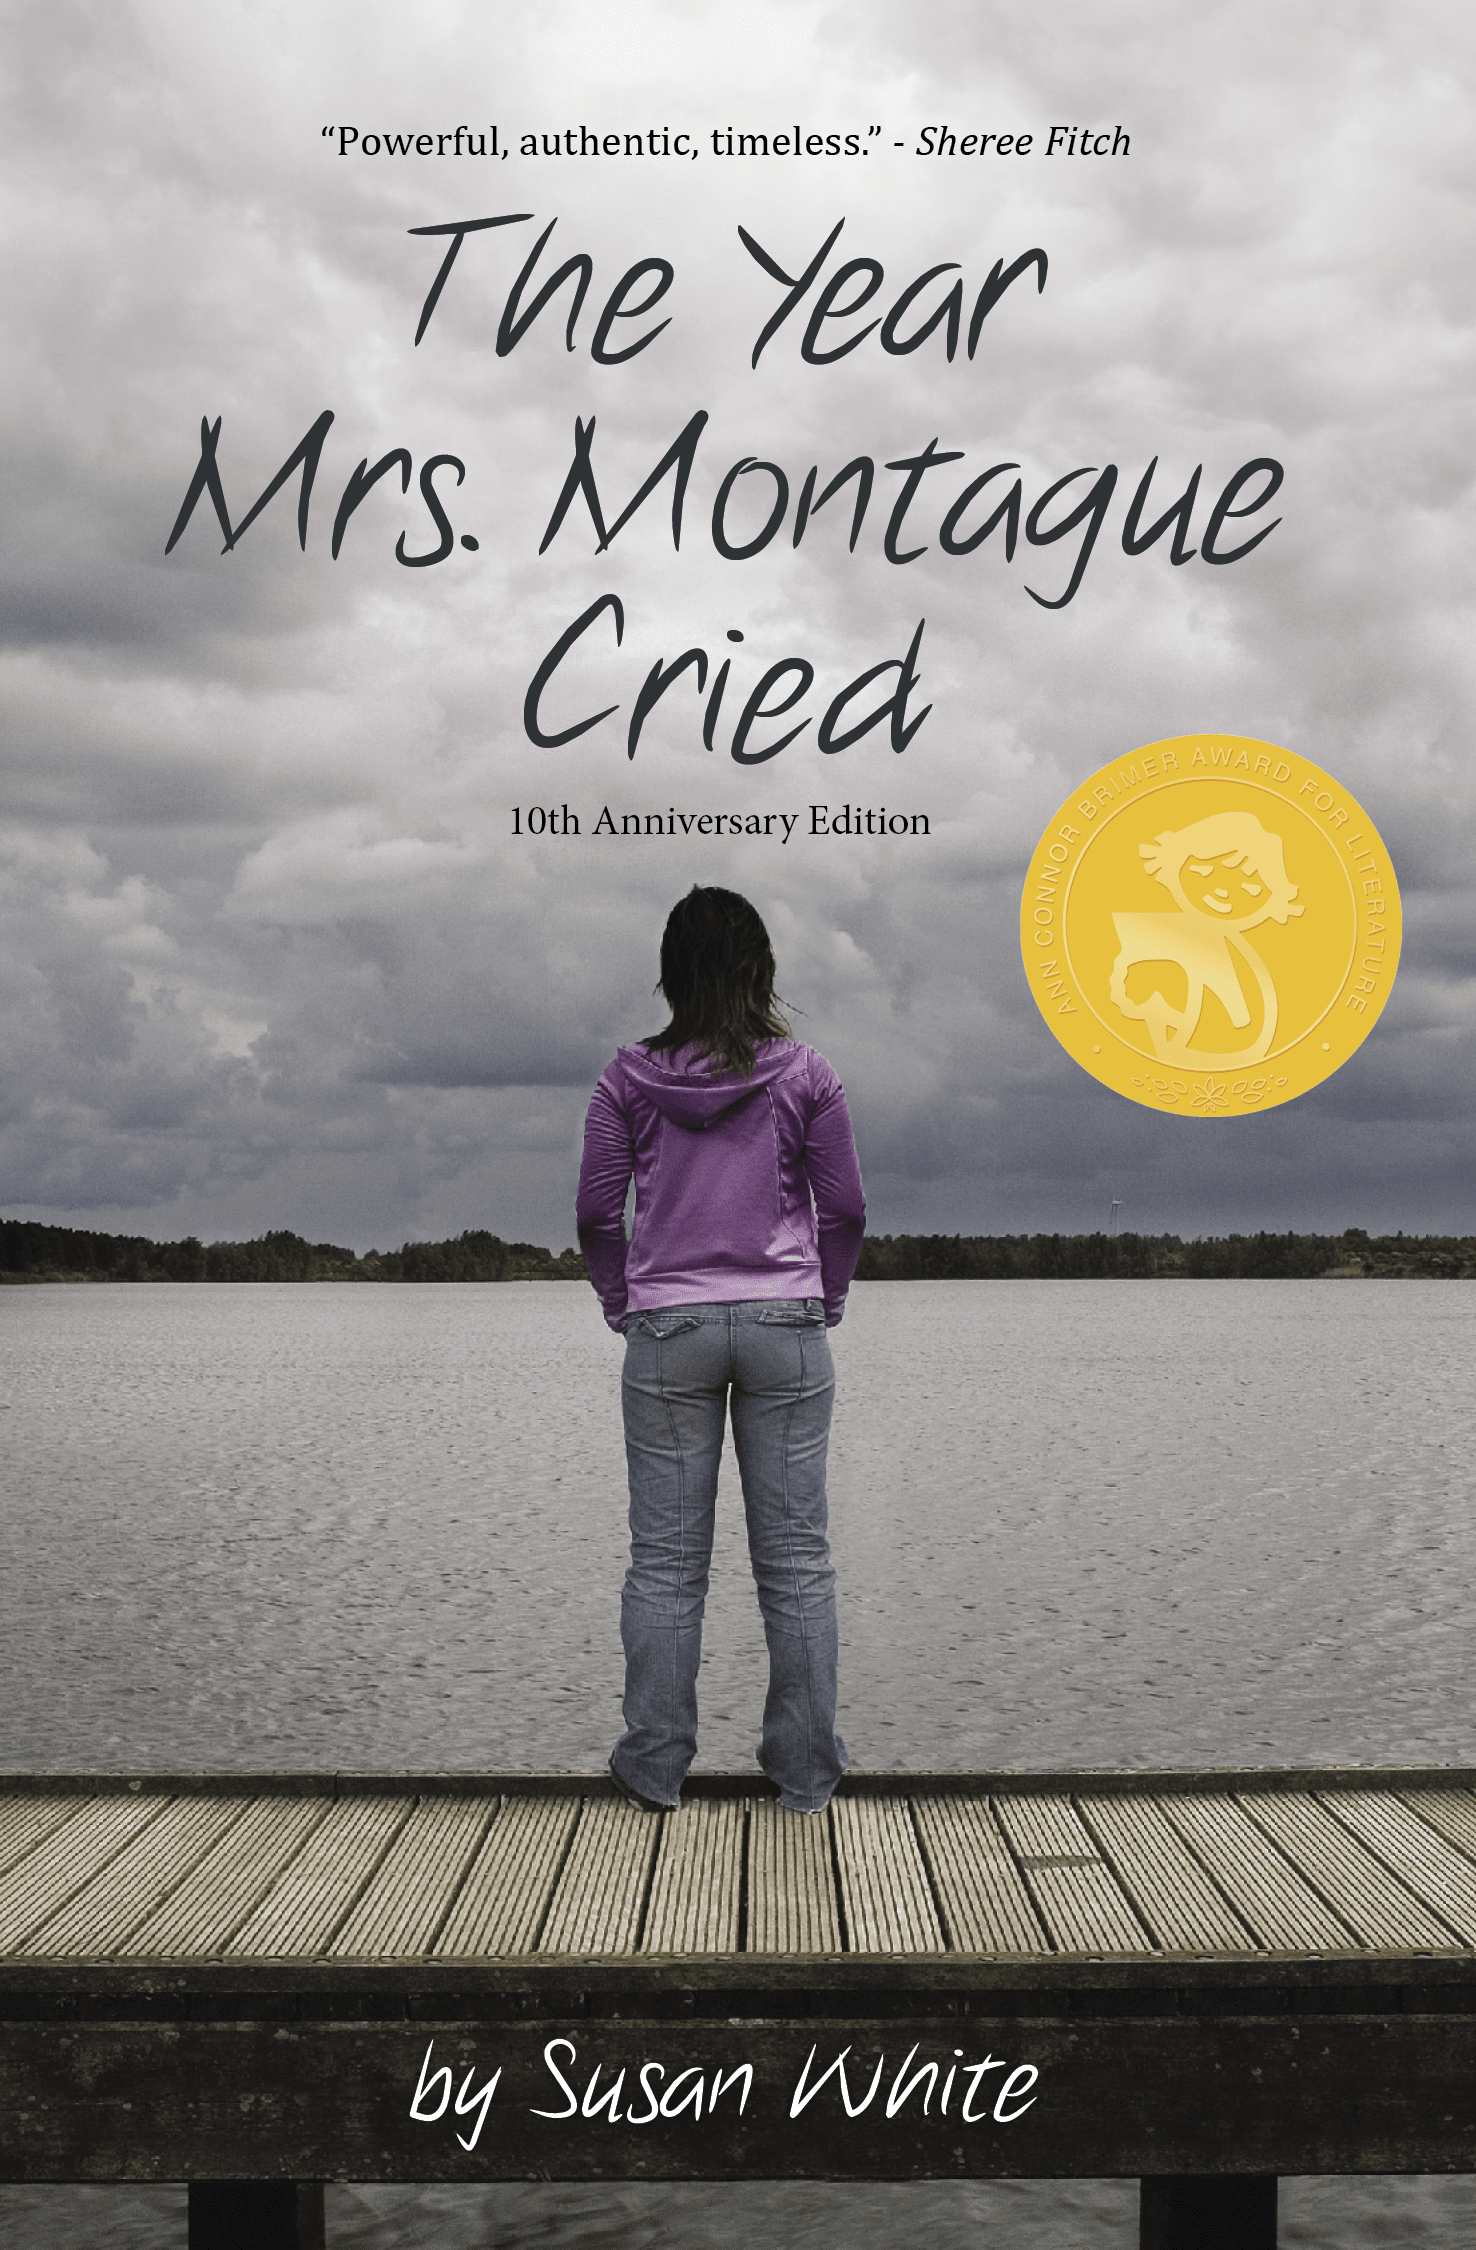 The Year Mrs. Montague Cried book cover